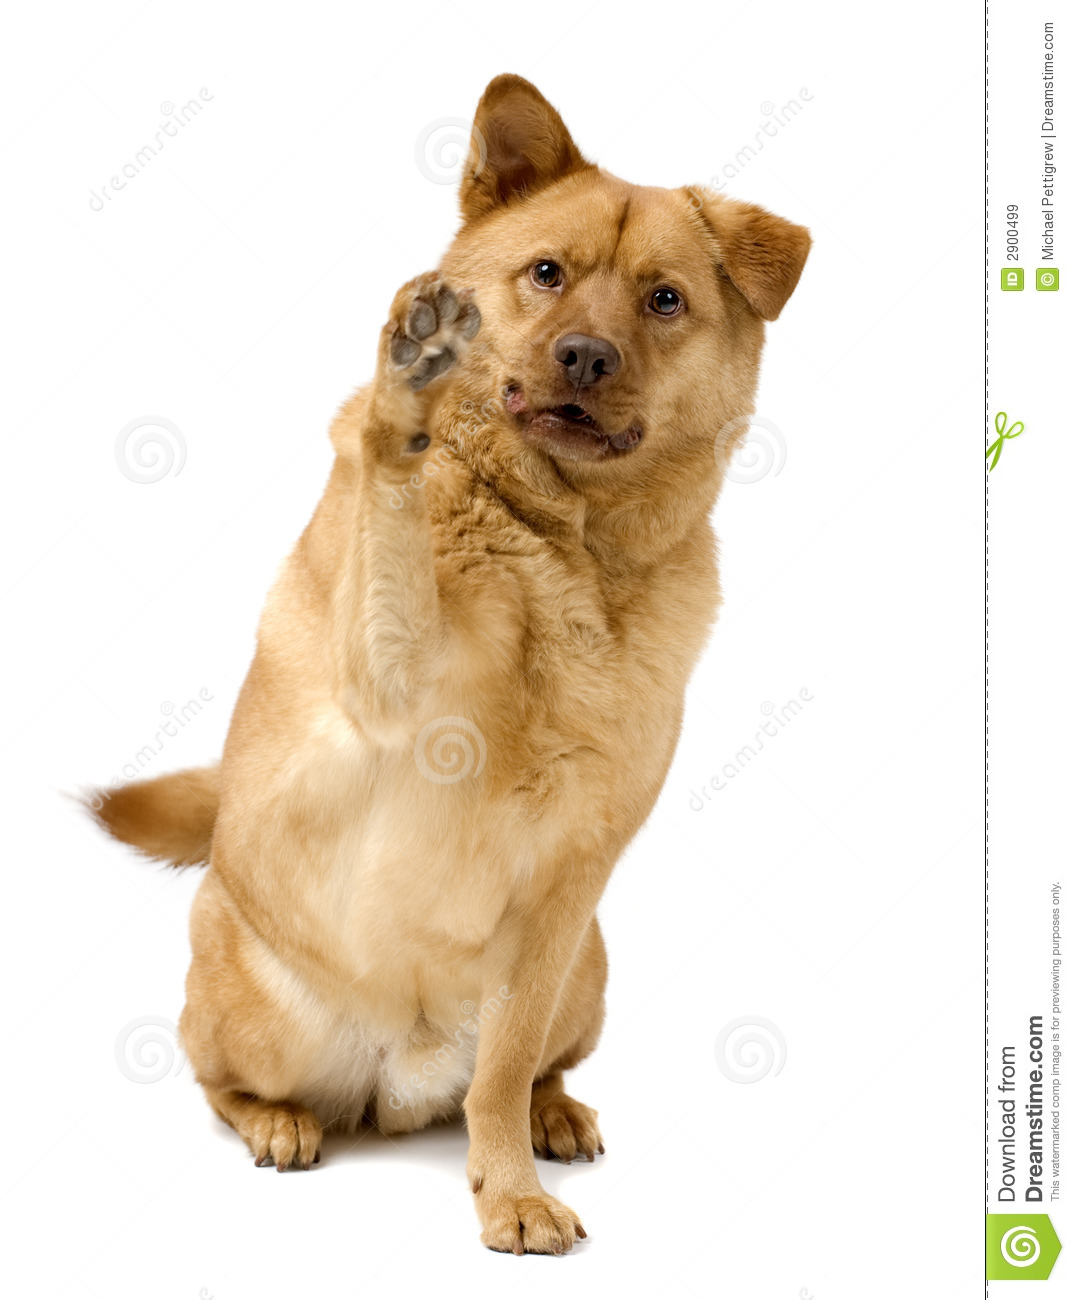 Dog High Five Royalty Free Stock Images   Image  2900499